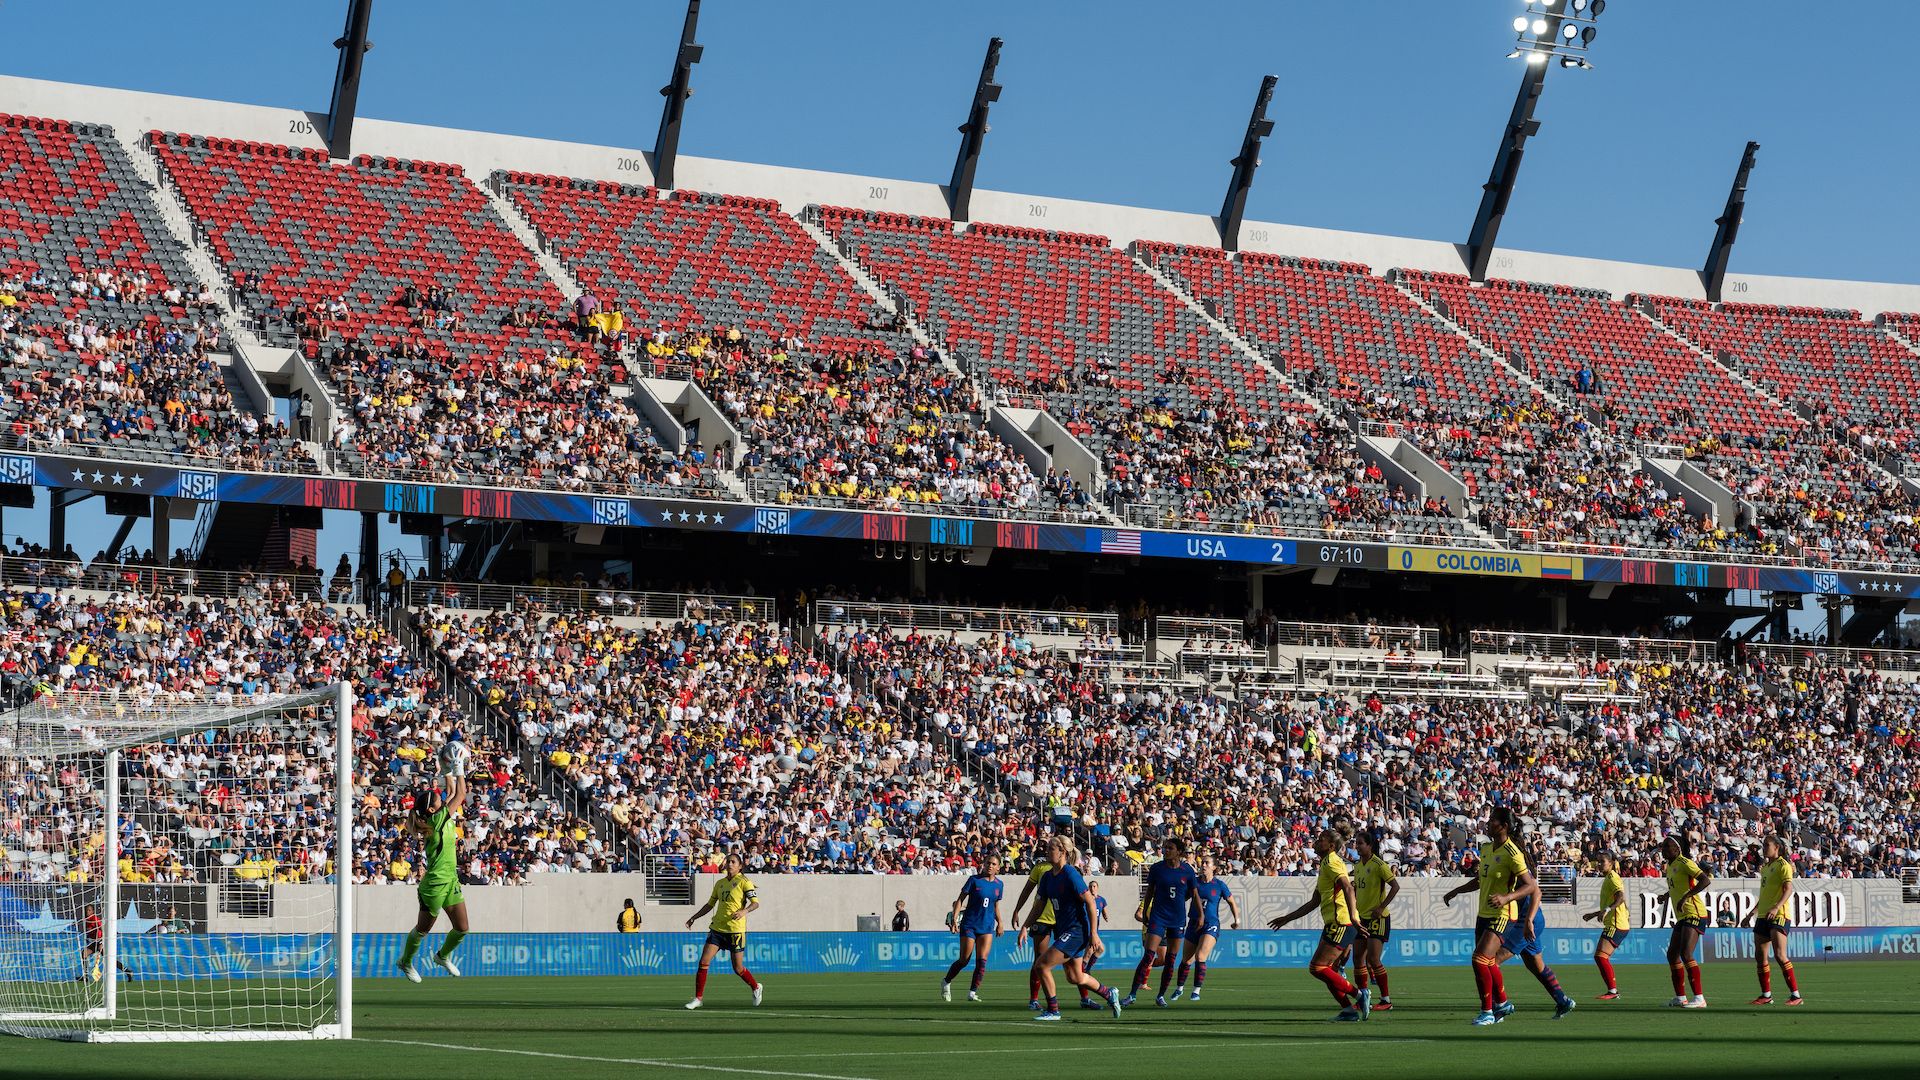 The U.S. women's national team players in blue jerseys attack the goal during a game vs. Colombia in yellow jerseys at Snapdragon Stadium with fans in the stands.